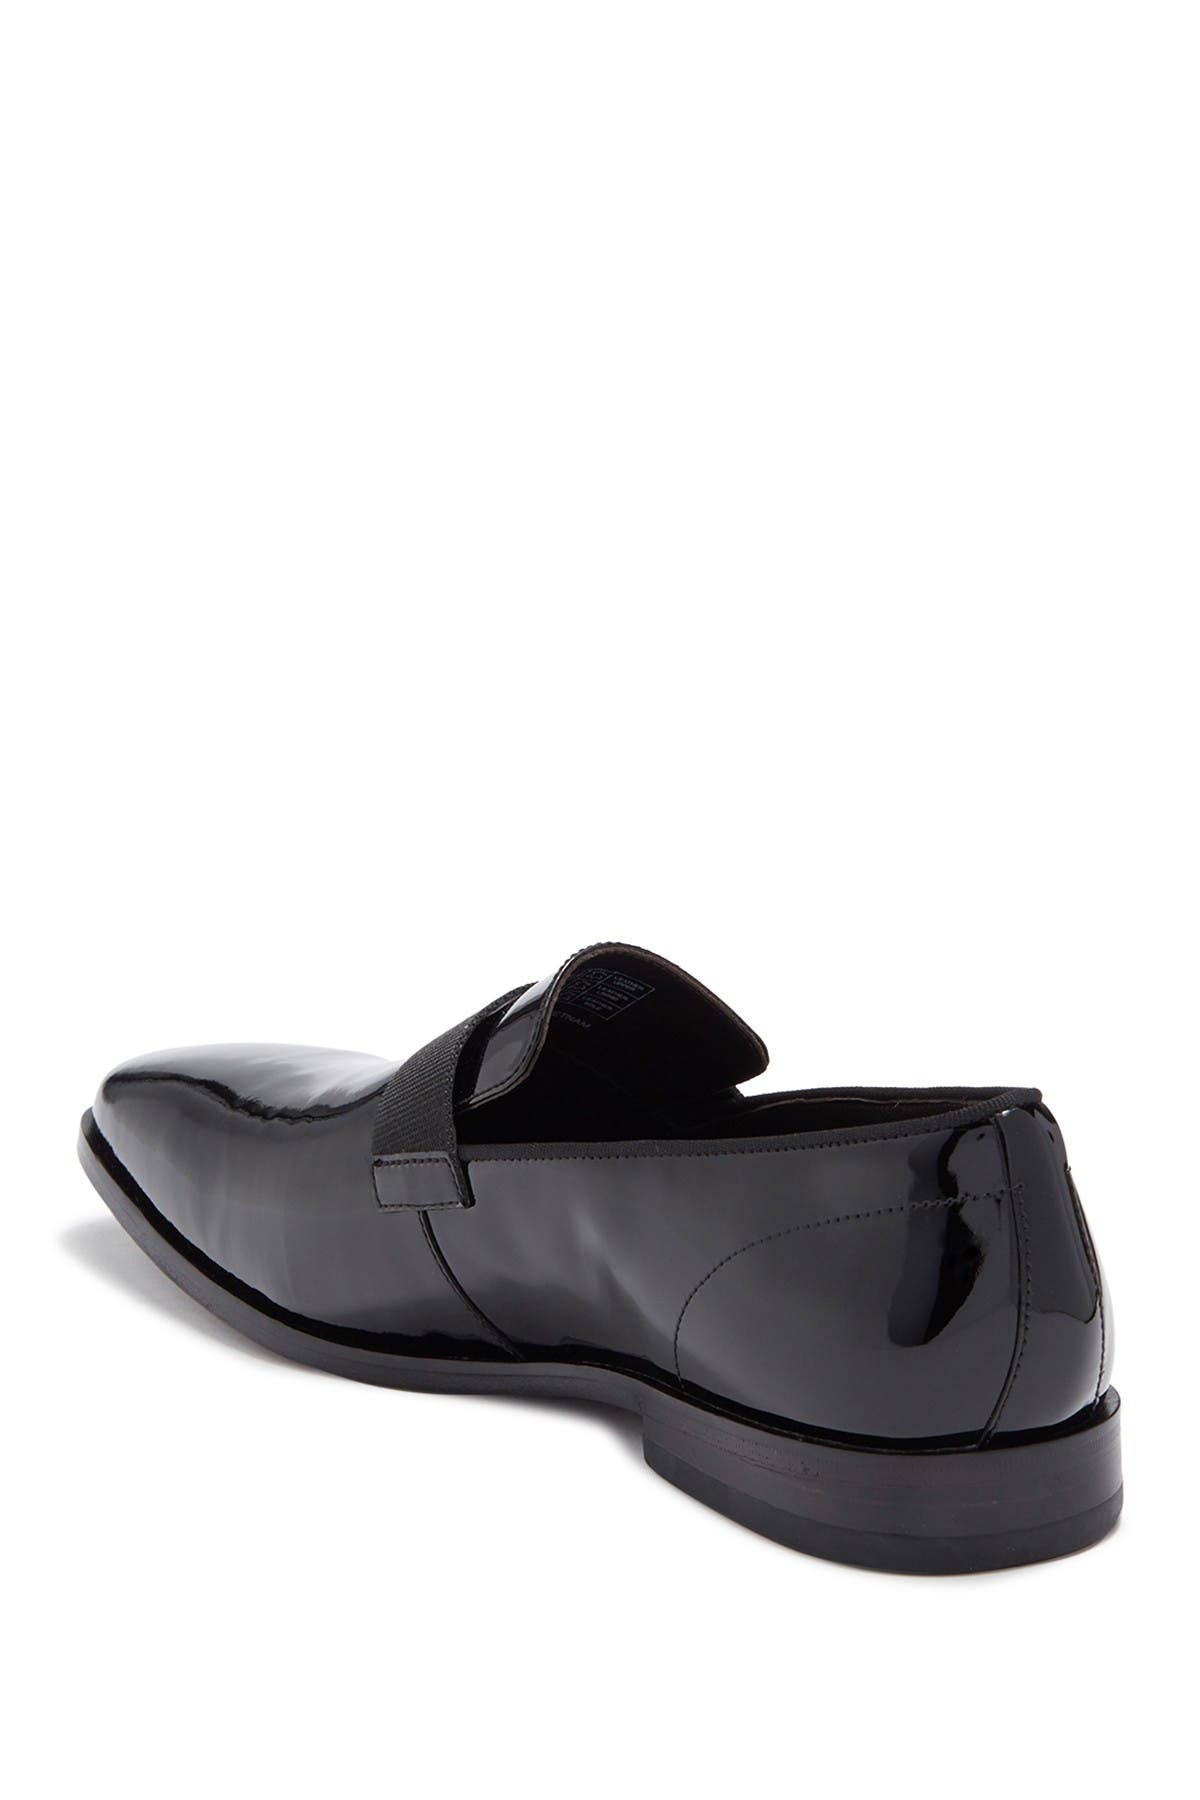 hugo boss highline patent leather loafers